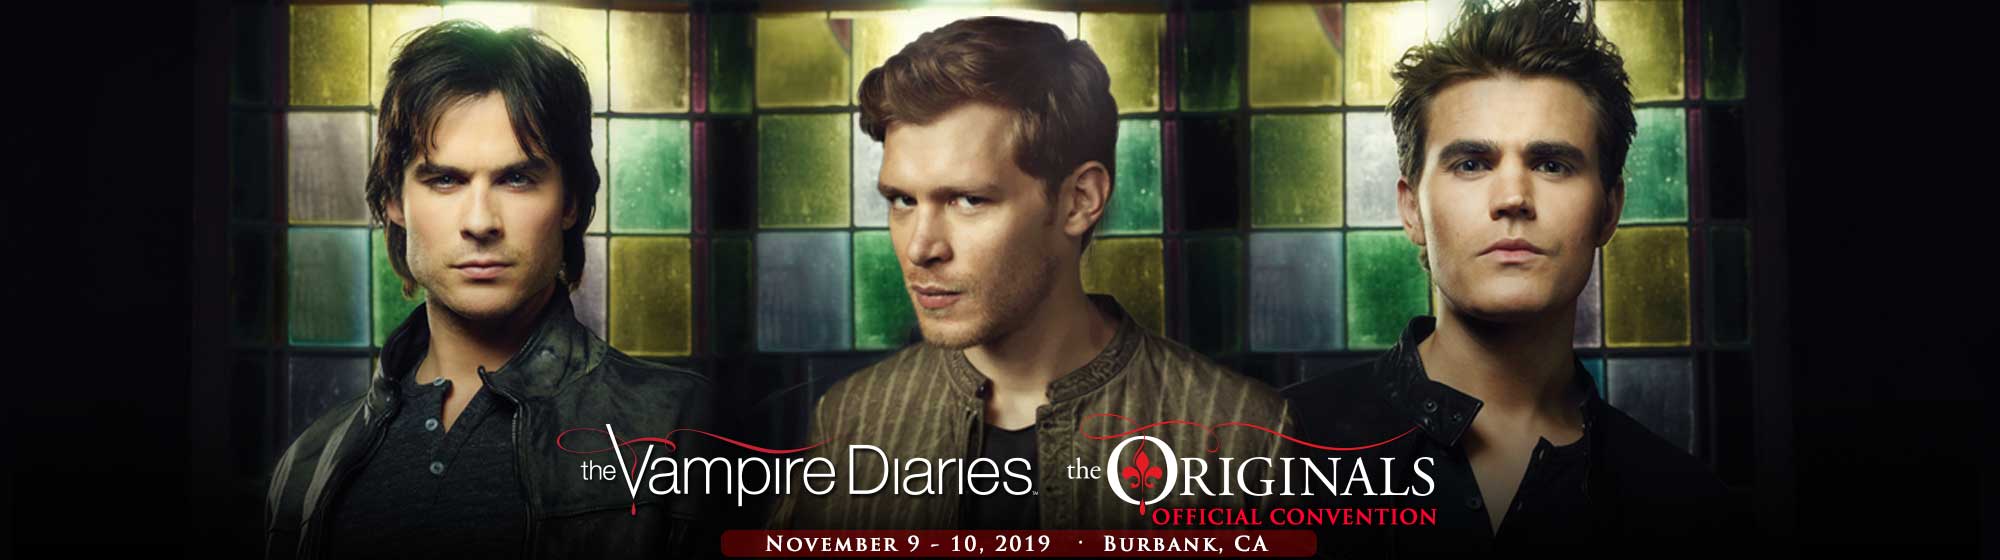 The Vampire Diaries and The Originals Official Convention Burbank, CA November 9-10, 2019